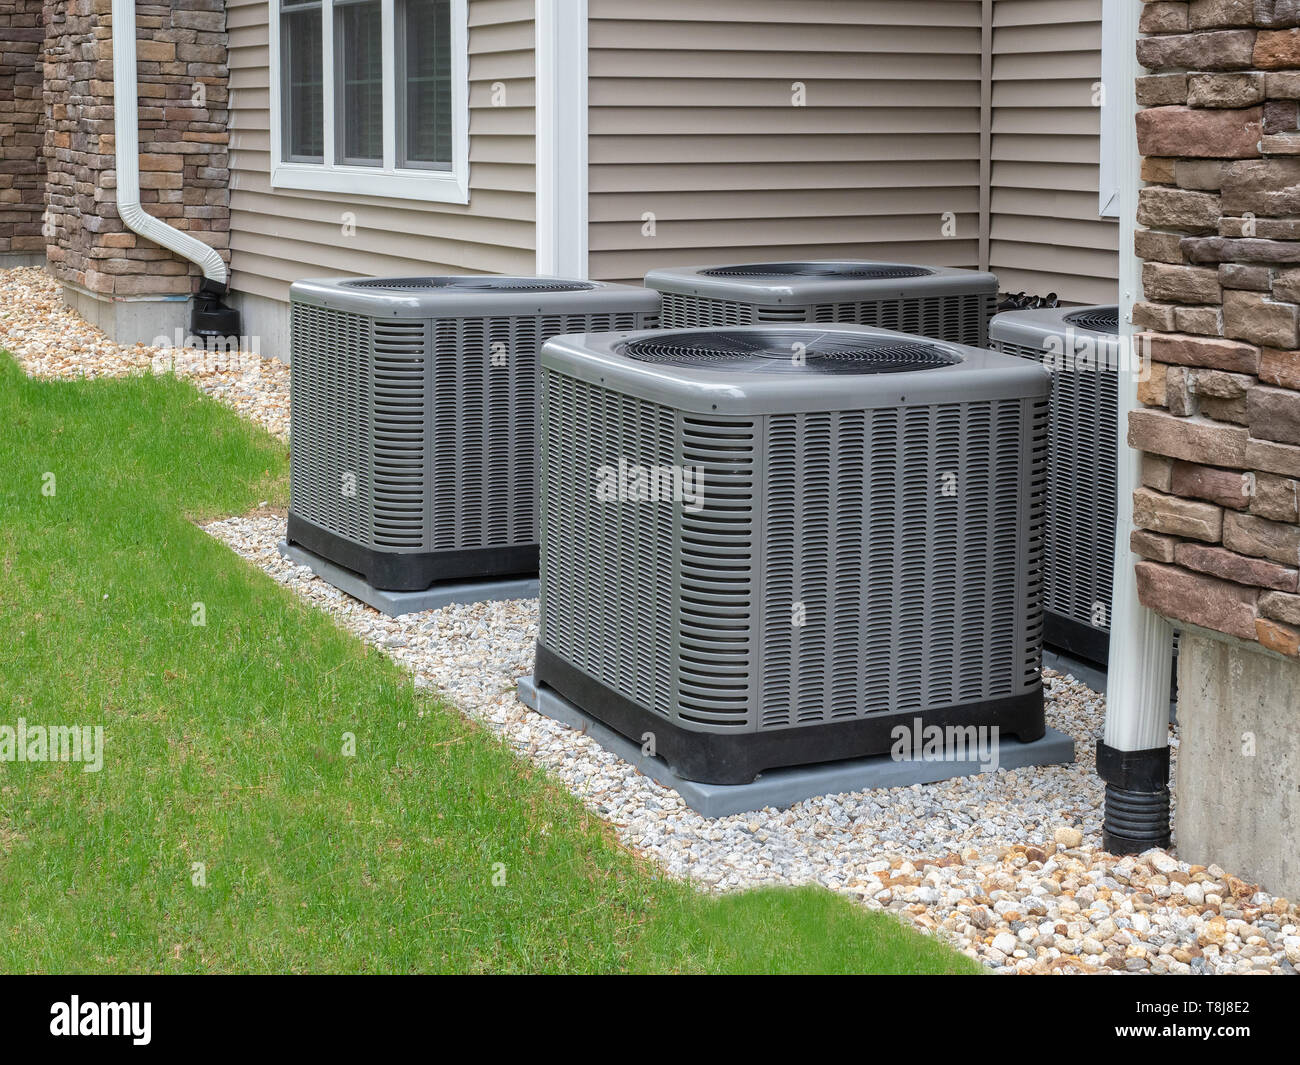 Outdoor air conditioning and heat pump units Stock Photo